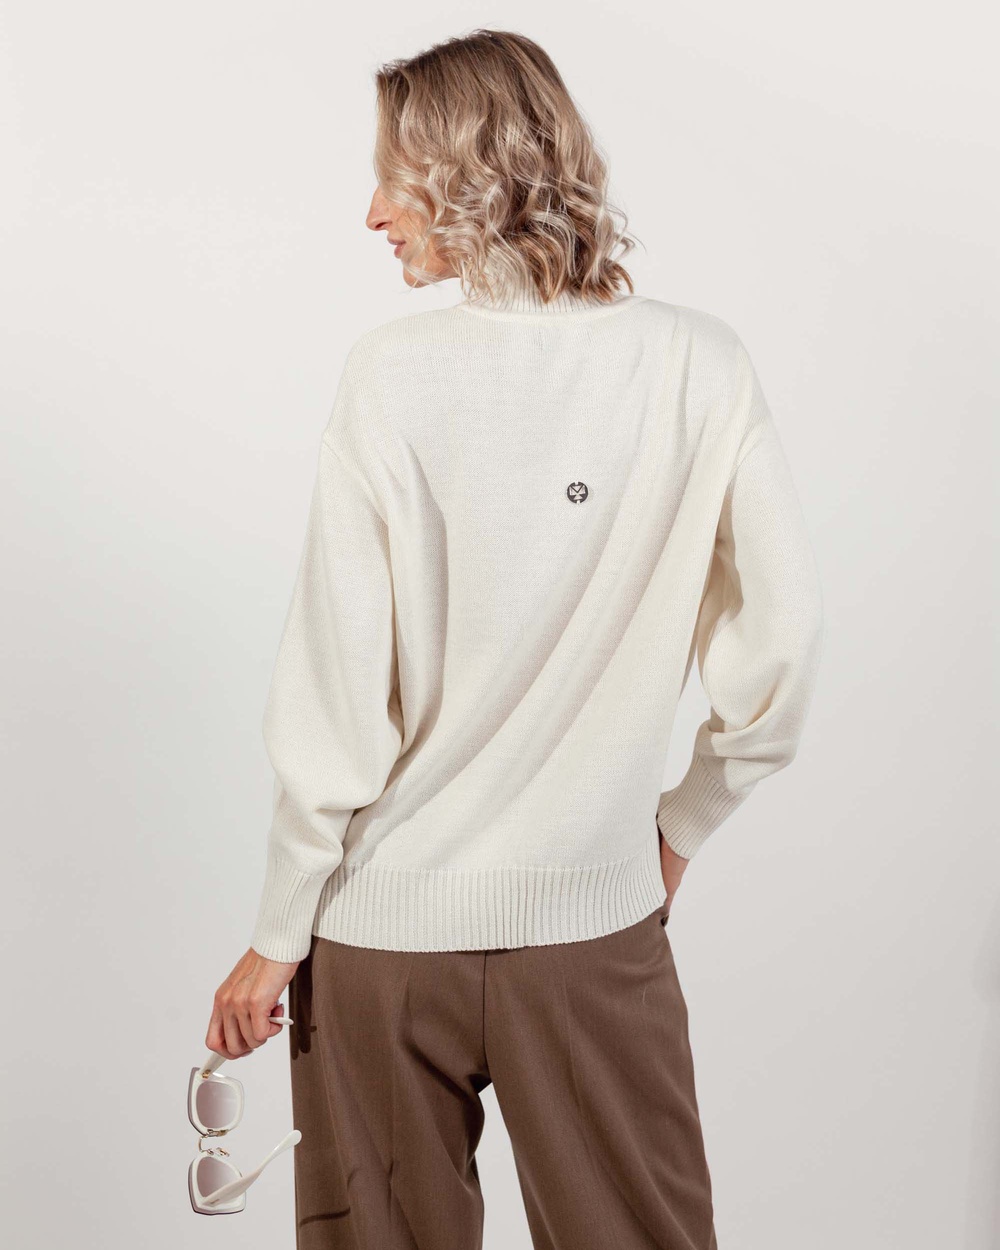 Merino knitted sweater 17 colors